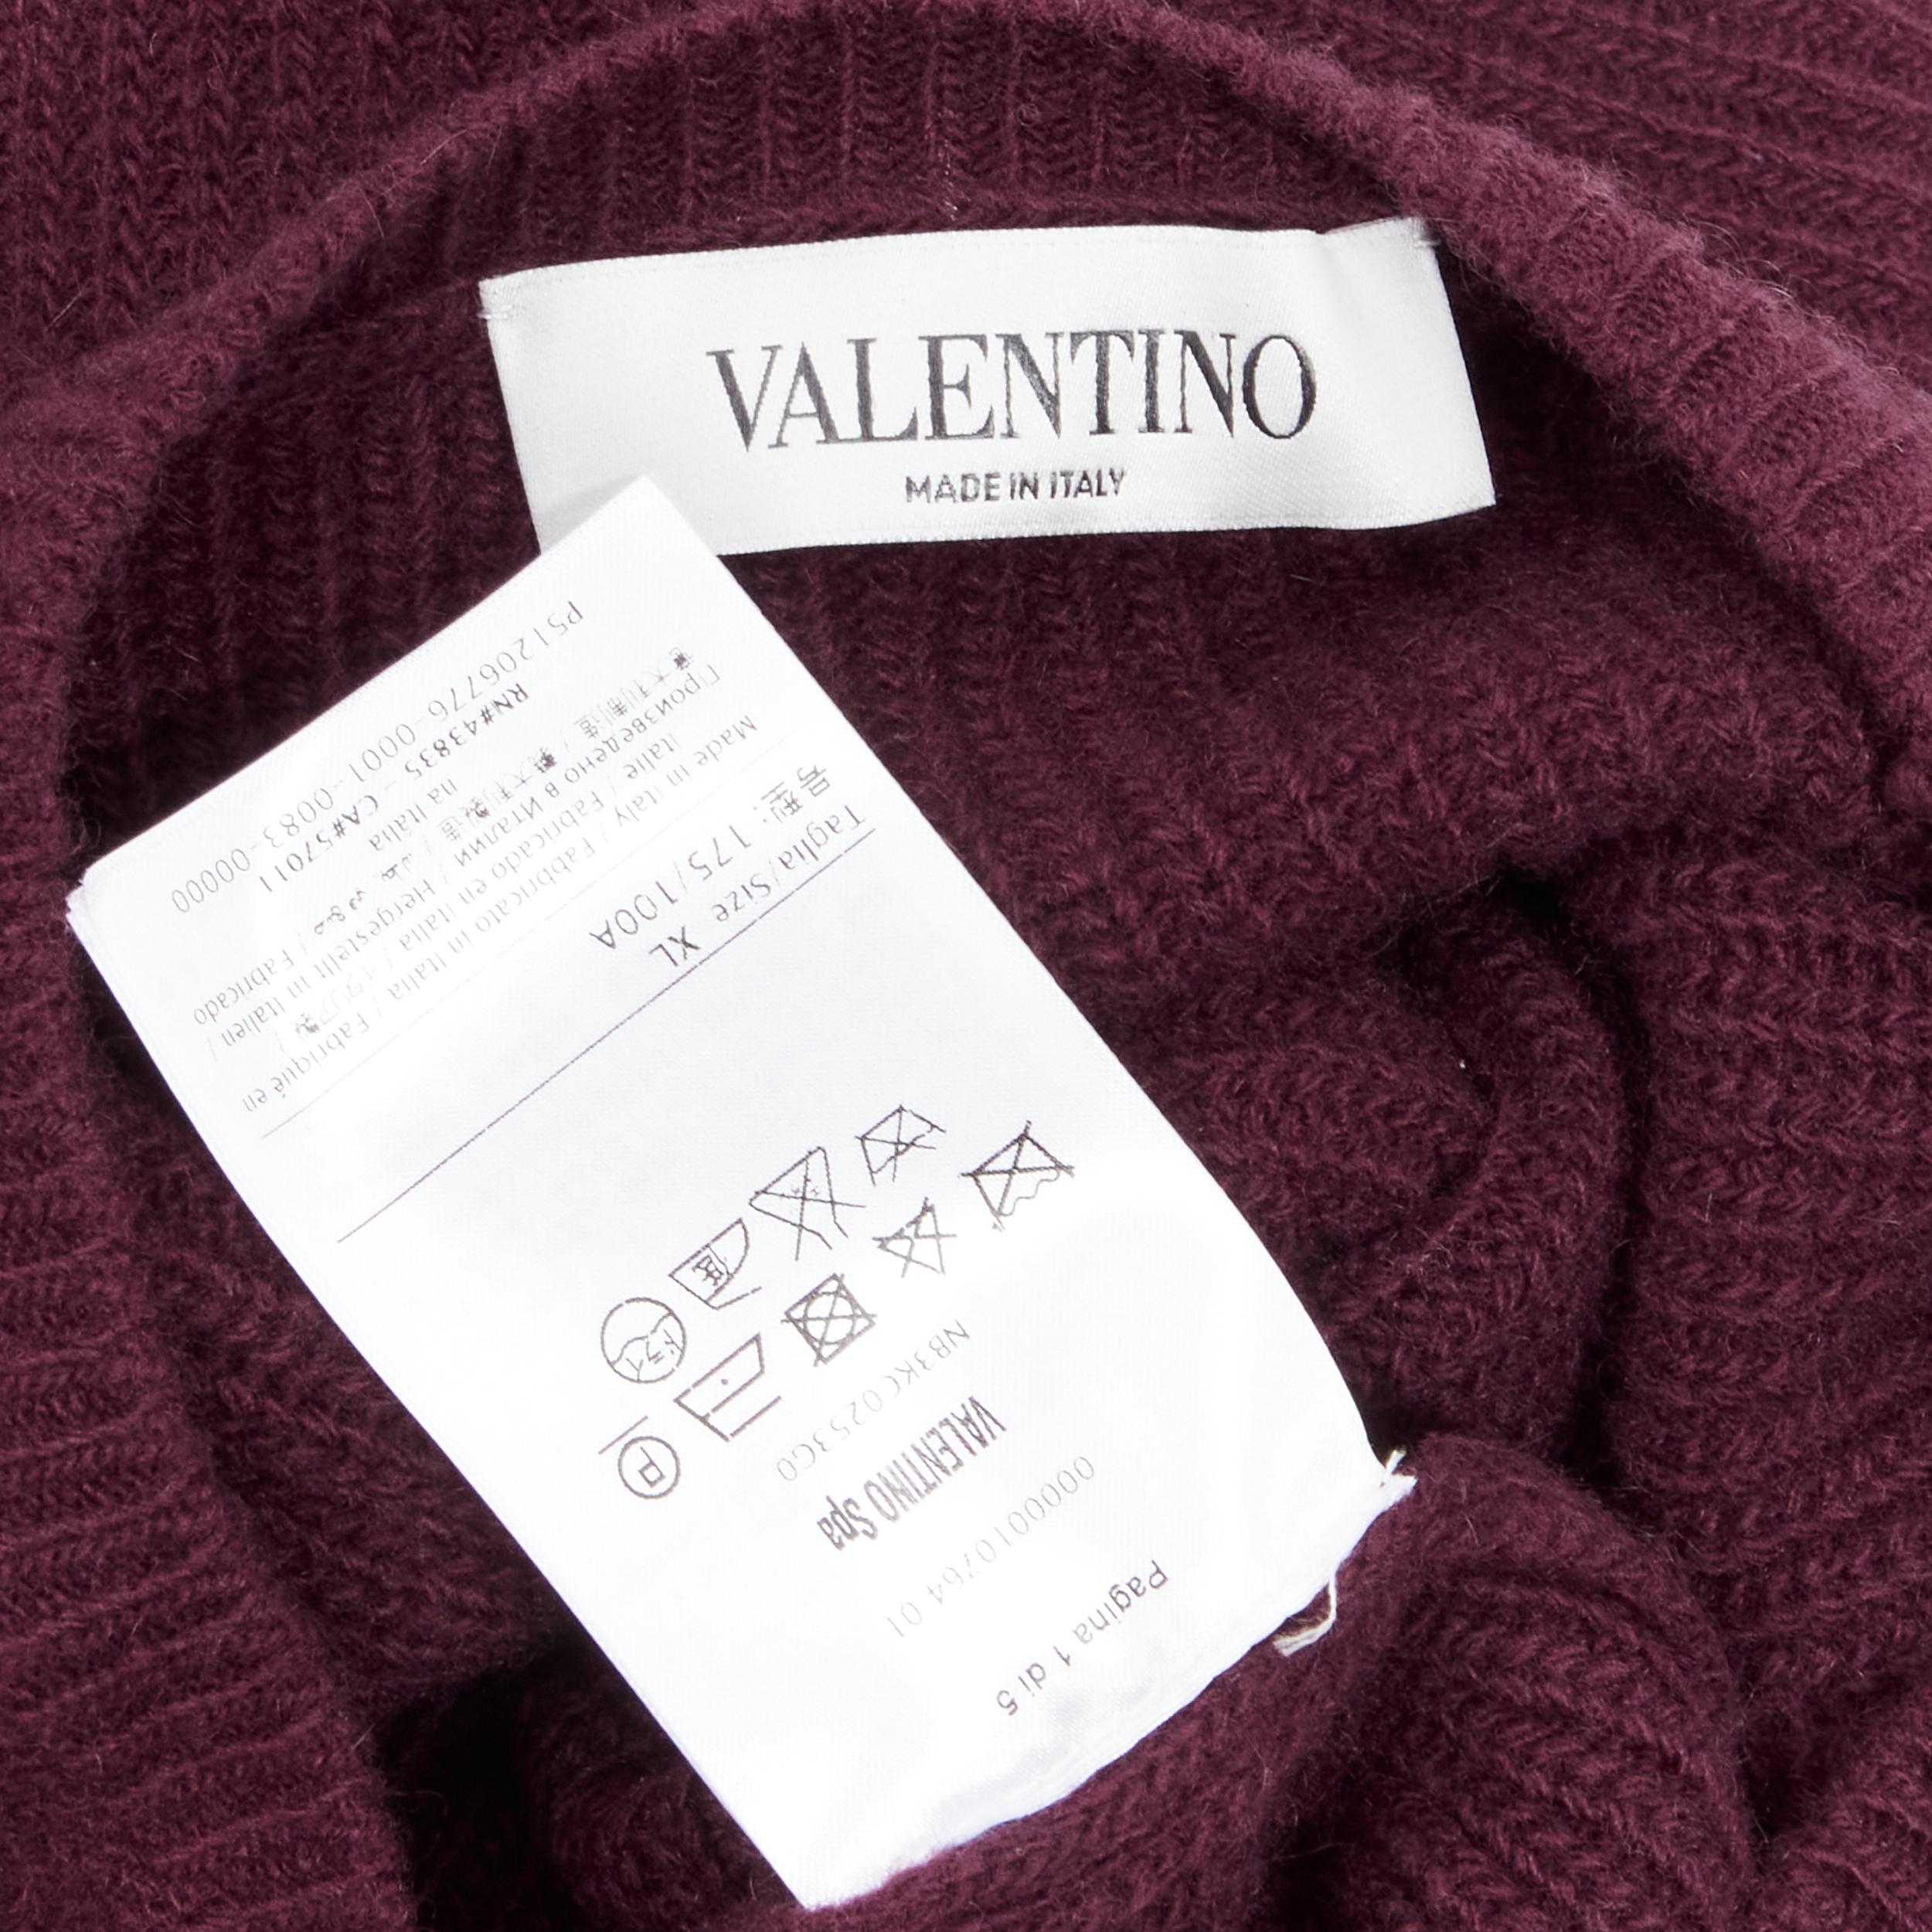 VALENTINO burgundy red virgin wool cashmere black floral lace applique sweater  For Sale 3